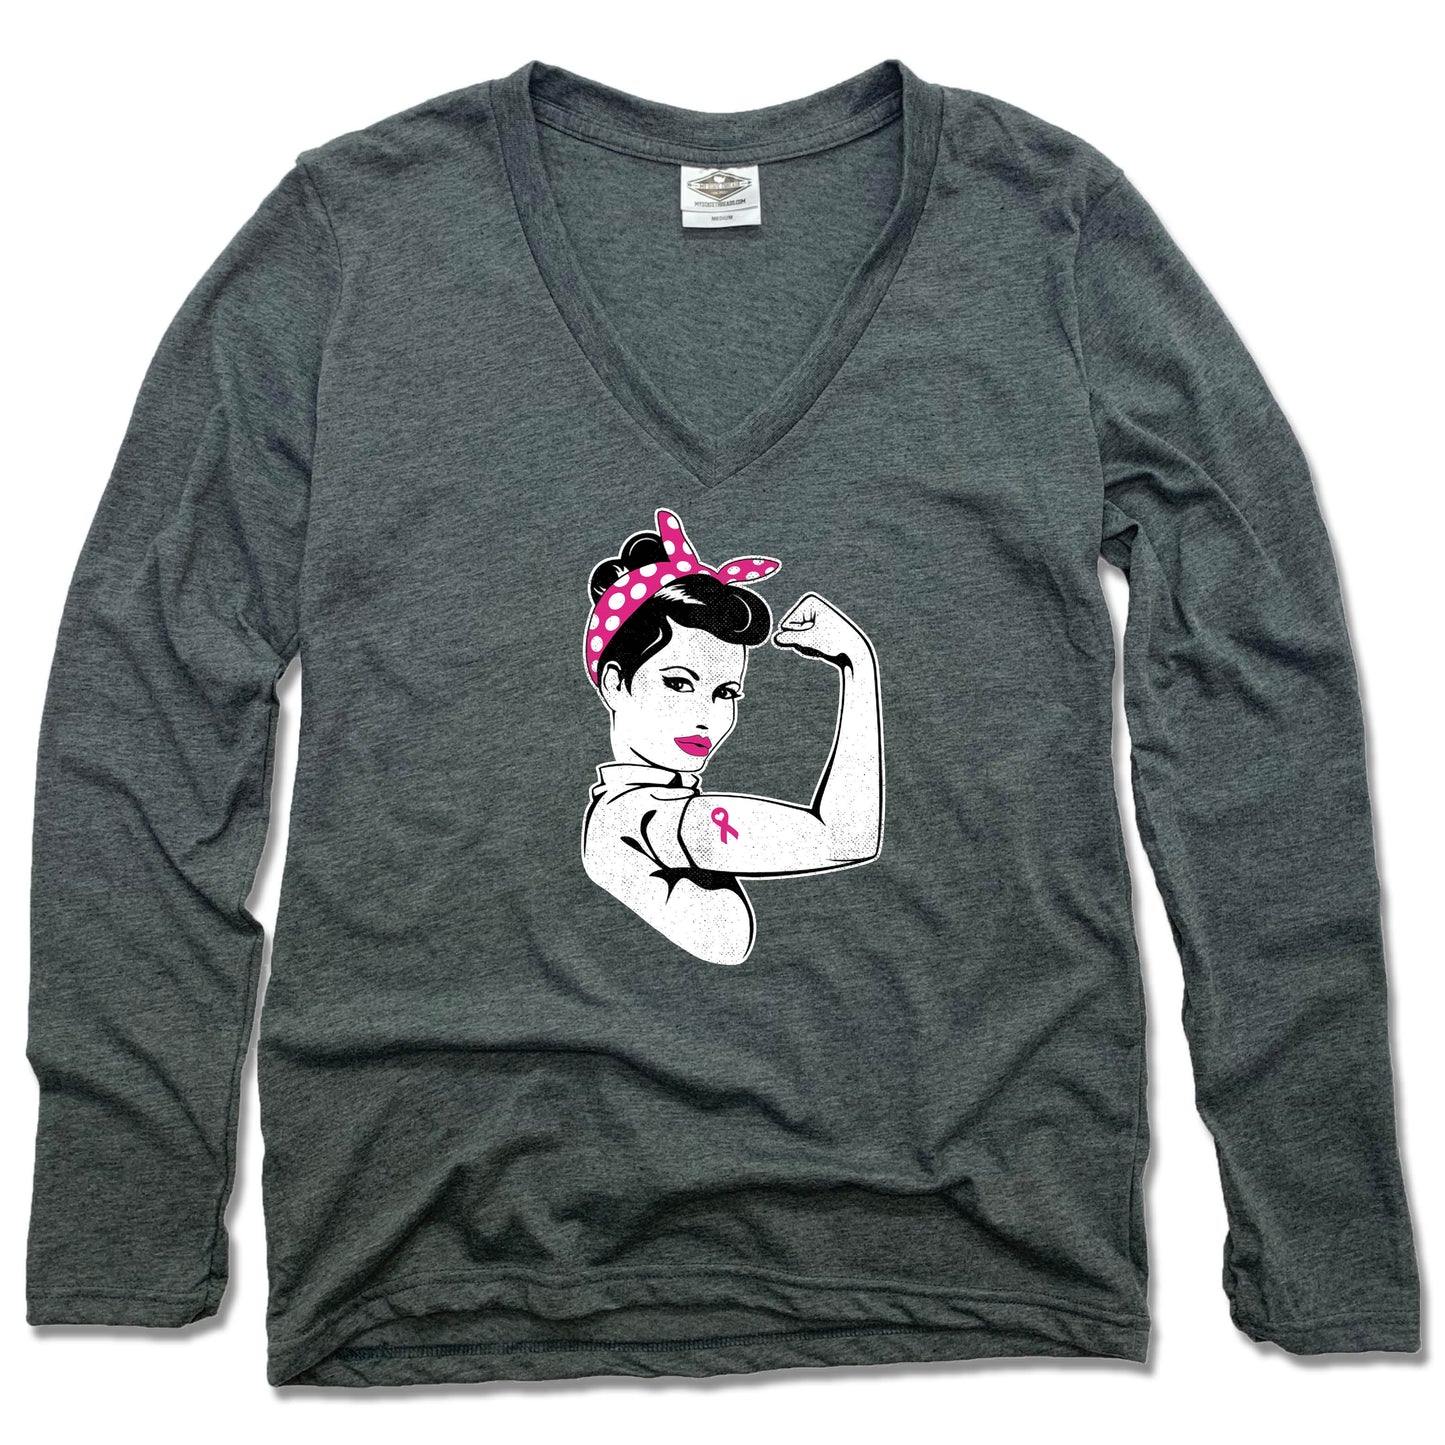 FIGHT BREAST CANCER | LADIES LONG SLEEVE V-NECK | CHARCOAL